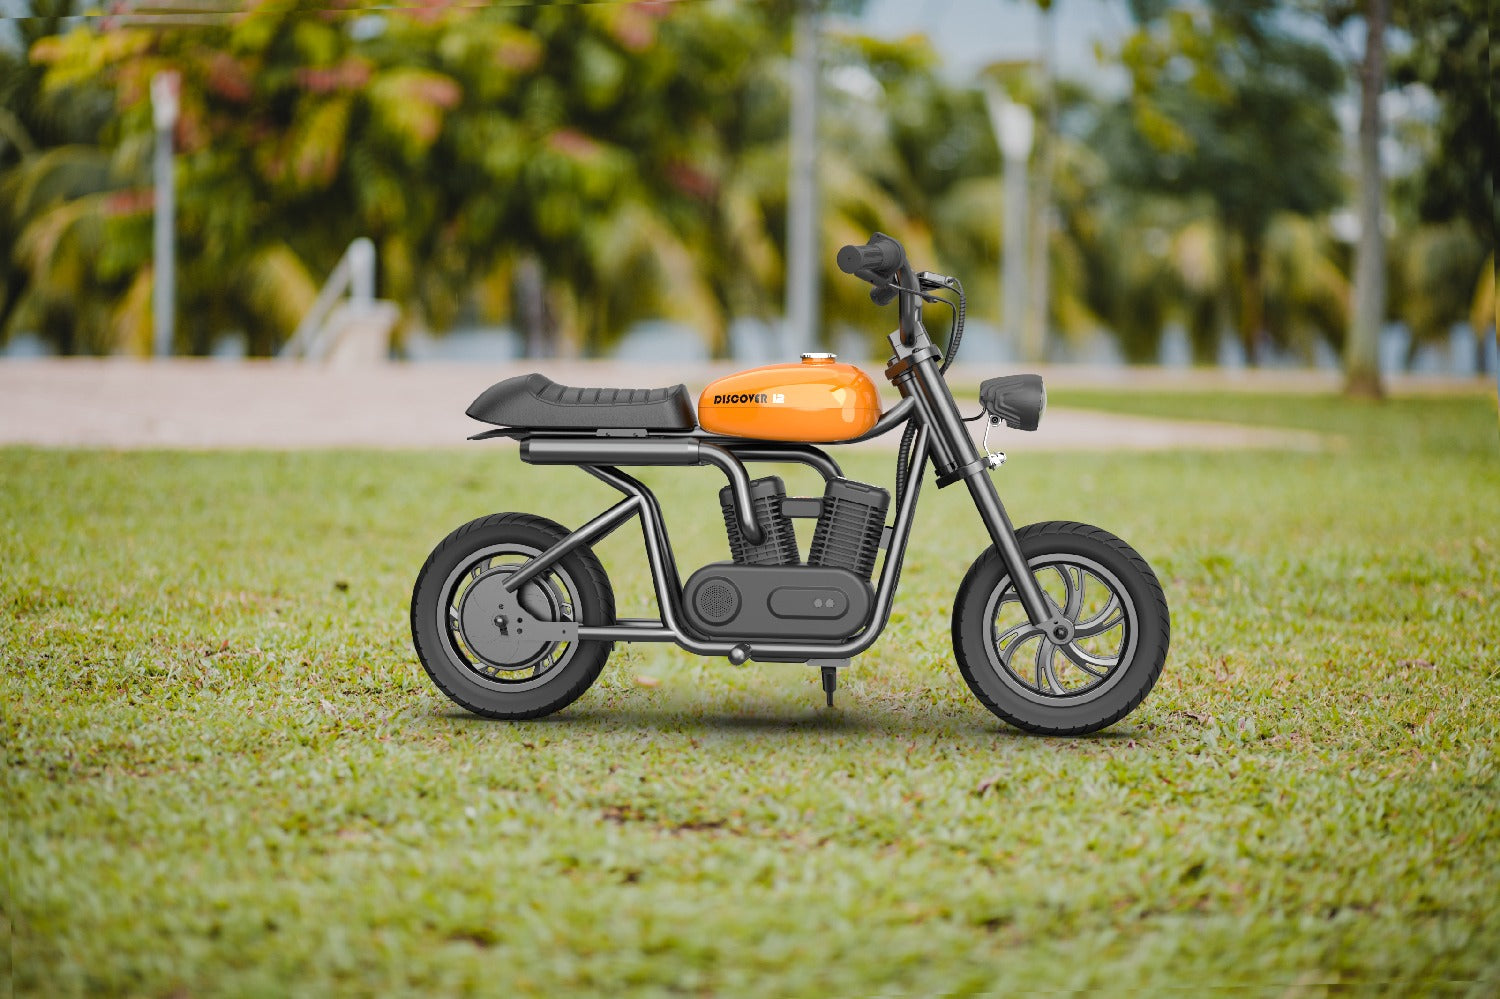 How The HYPER GOGO Mini Motorcycle Provides Higher DIY Attributes?